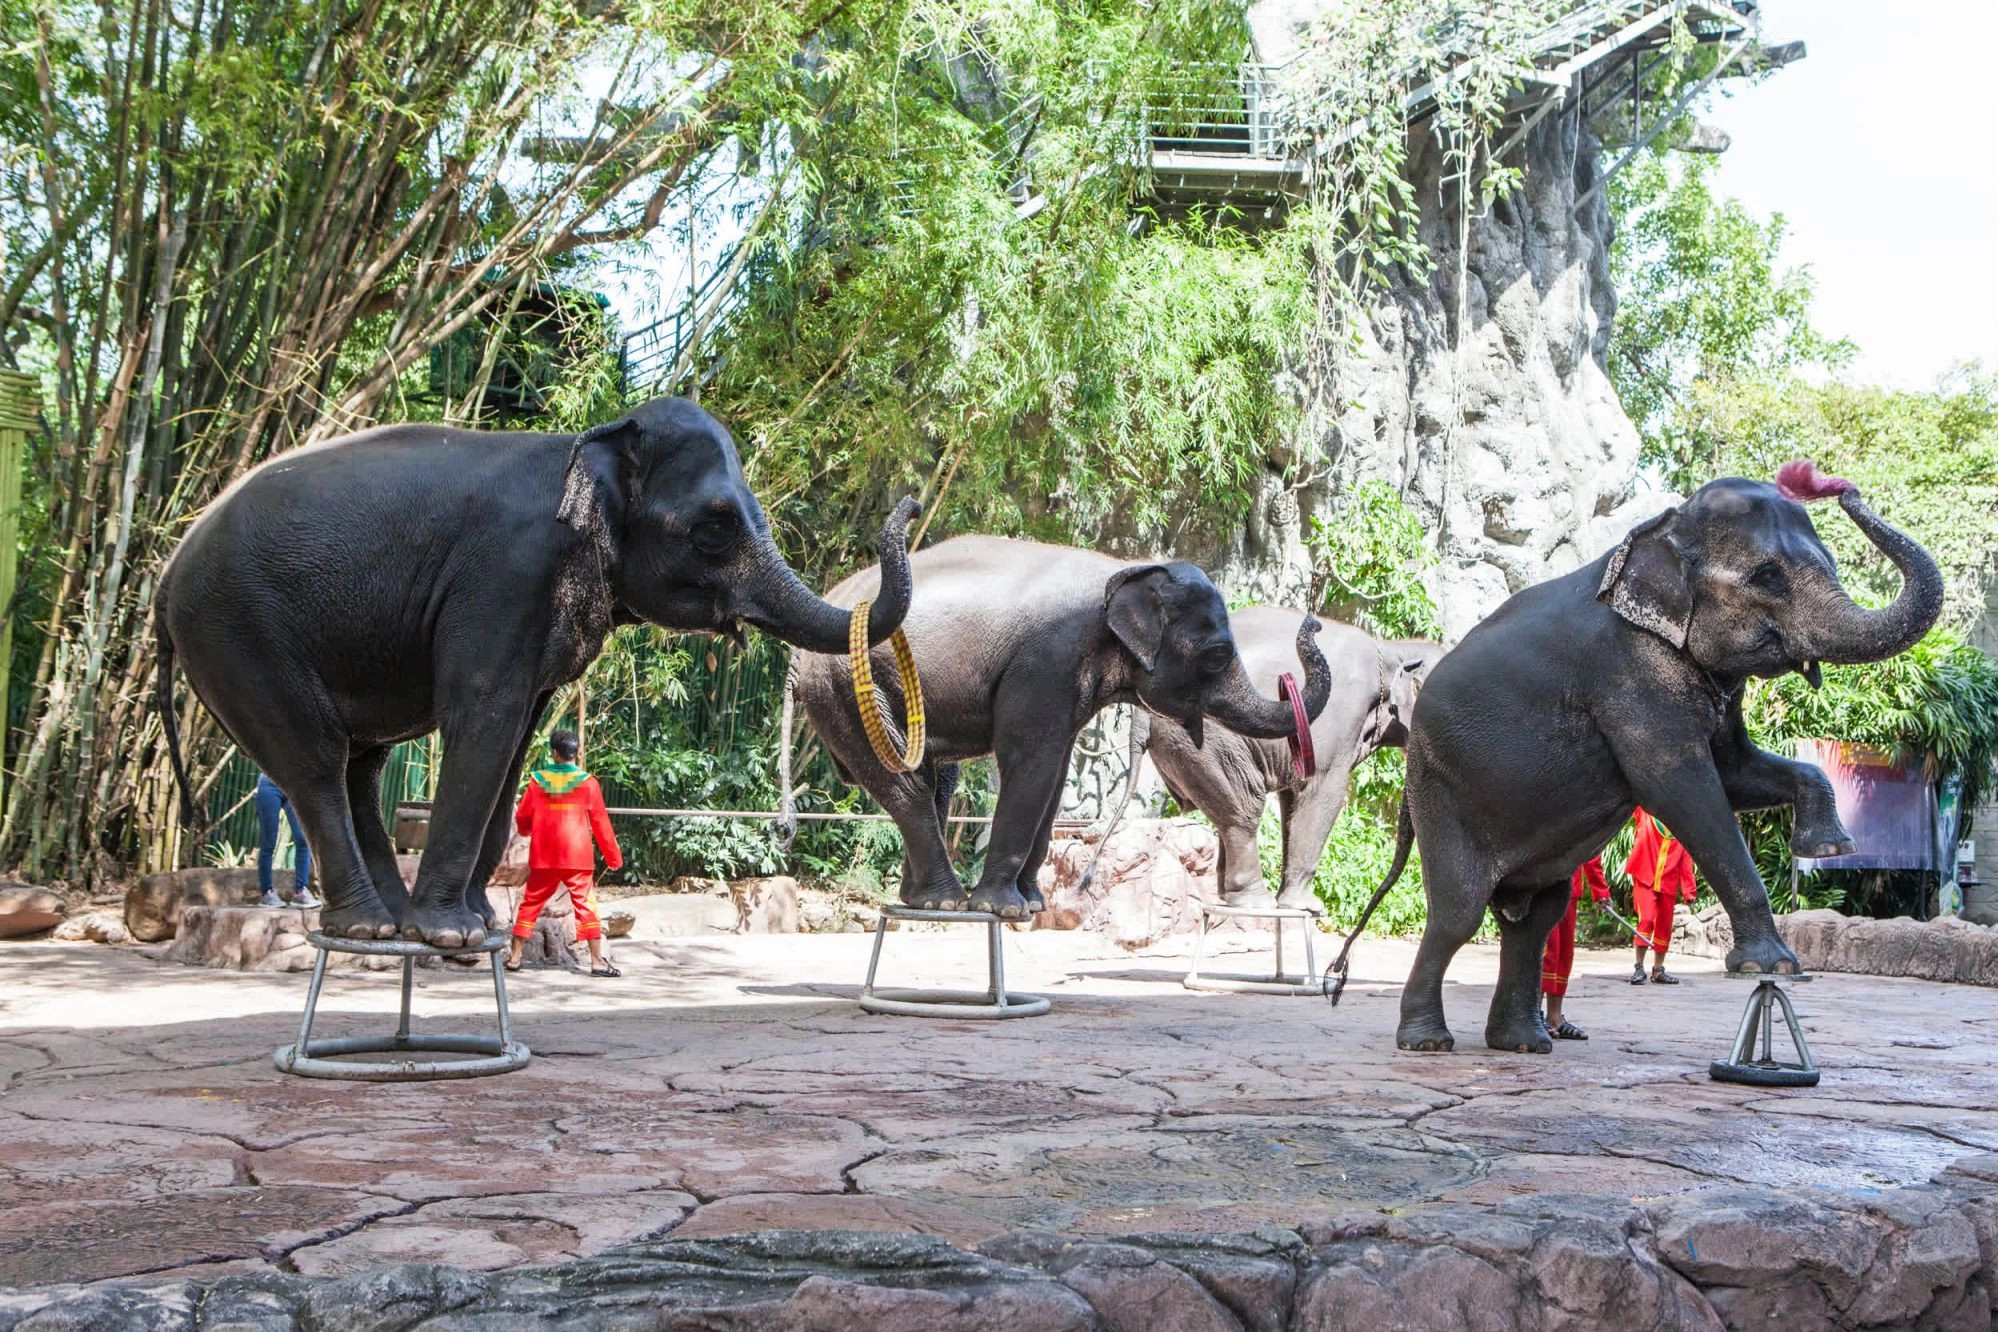 Elephants giving a performance in front of a large crowd of tourists at a wildlife venue in Thailand